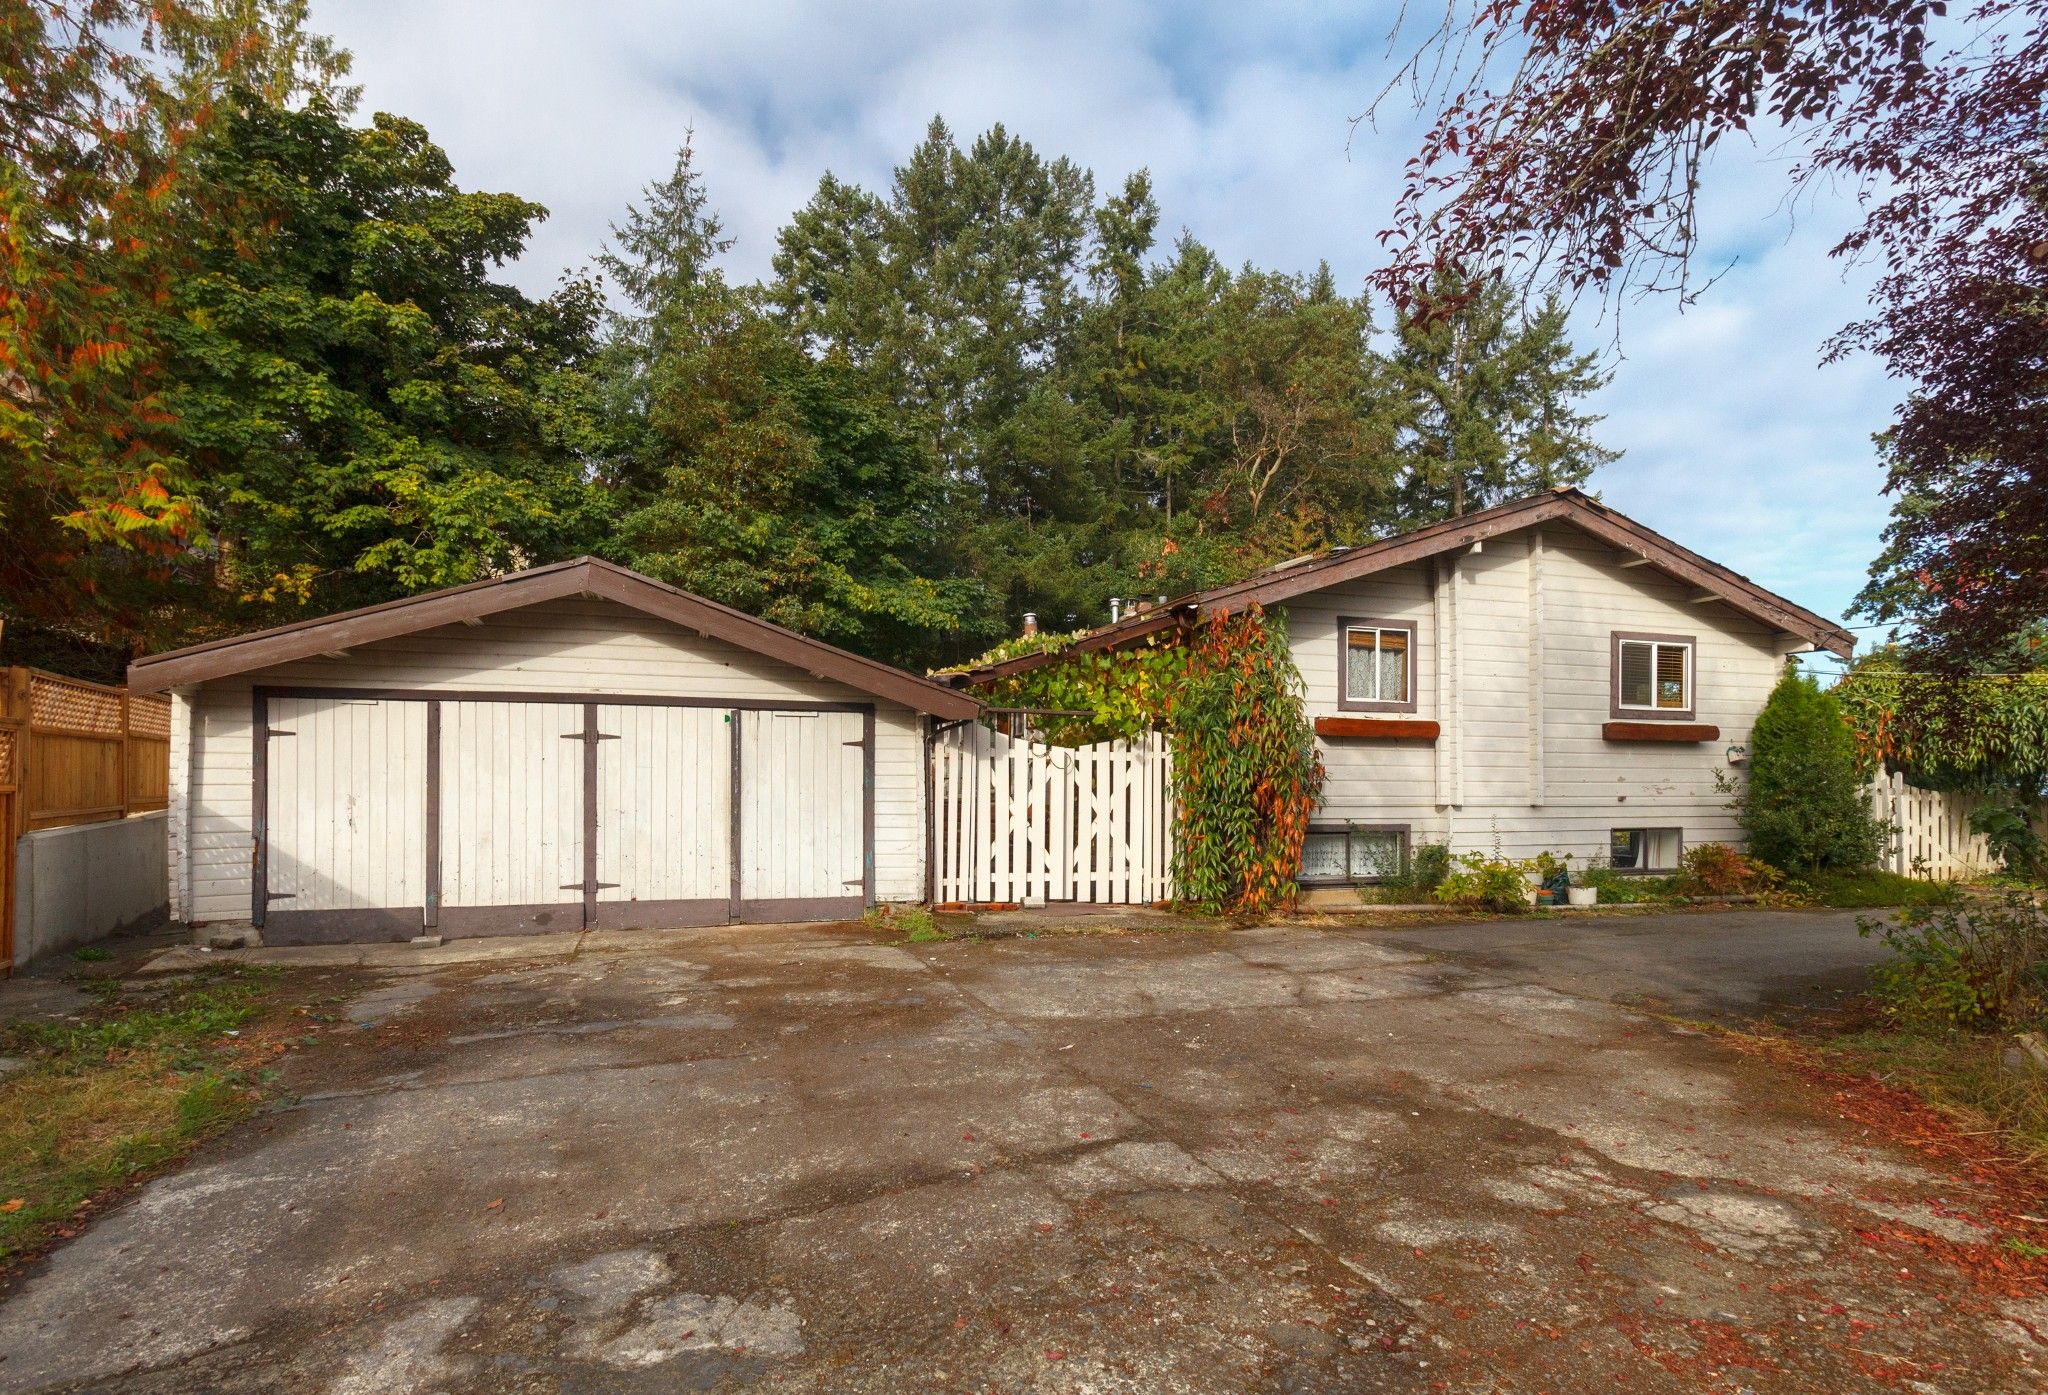 Main Photo: 6898 Woodward Drive in Central Saanich: Single Family for sale : MLS®# 383677